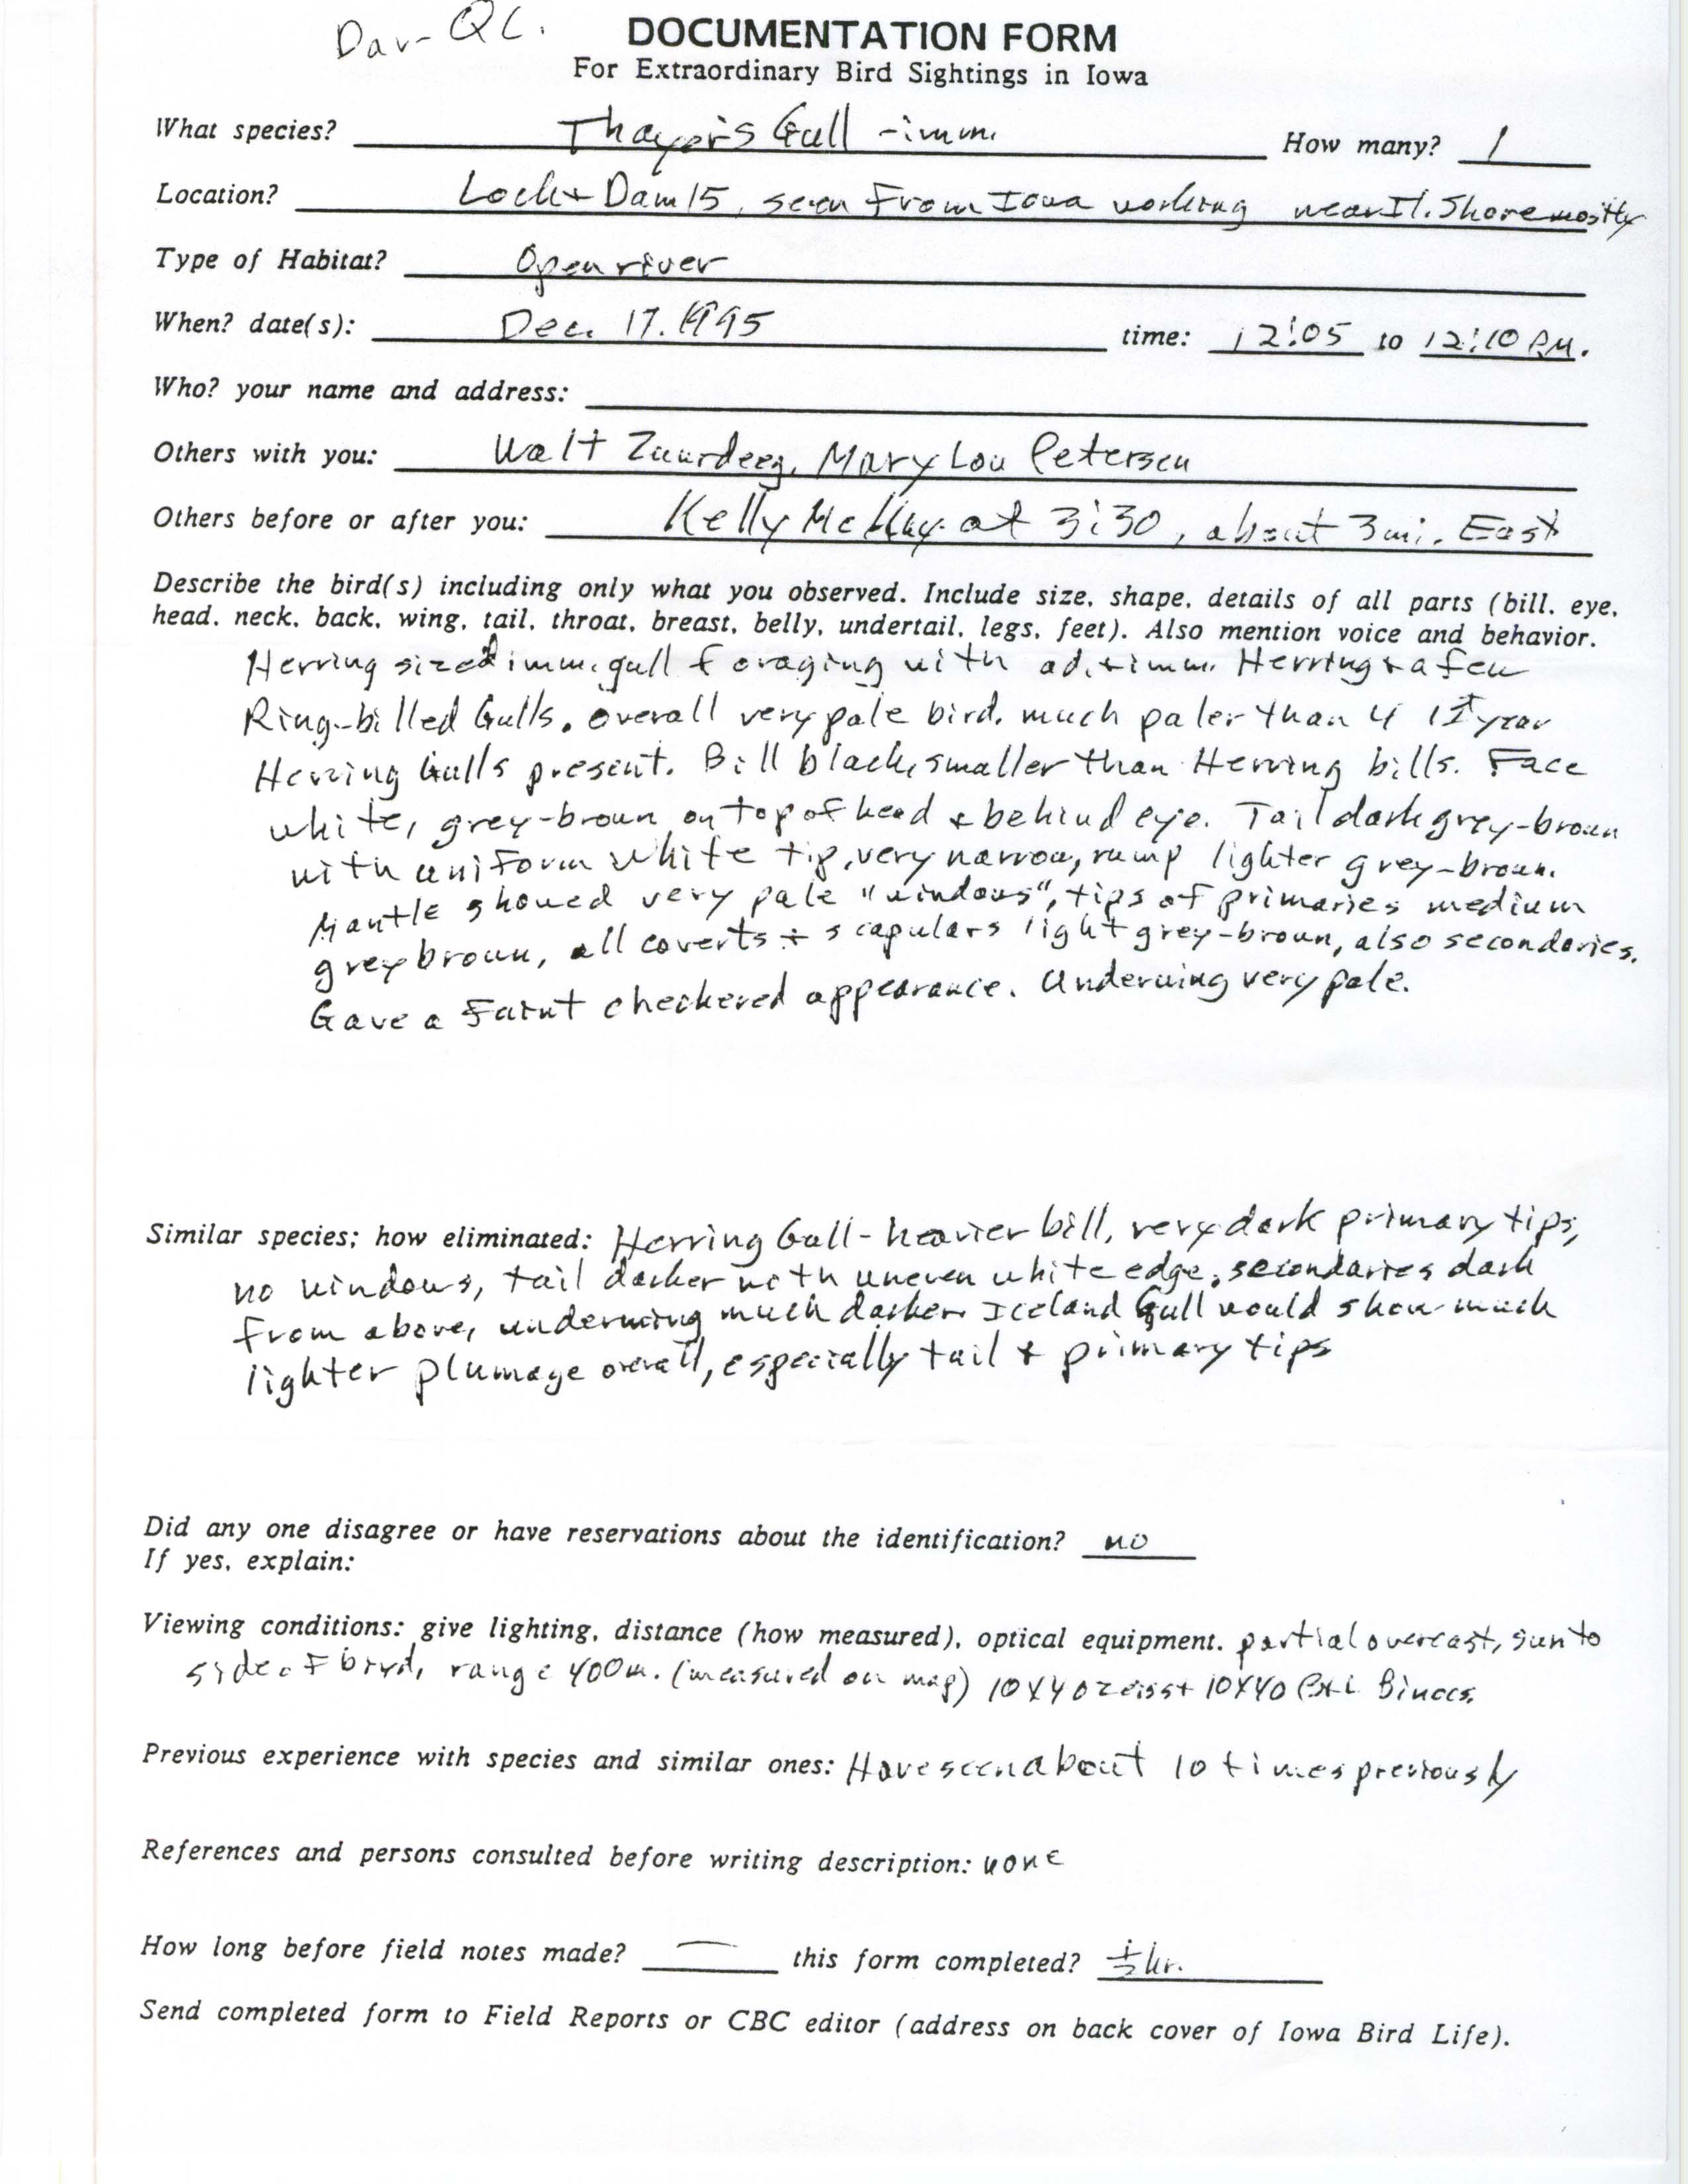 Rare bird documentation form for Thayer's Gull at Lock and Dam 15, 1995